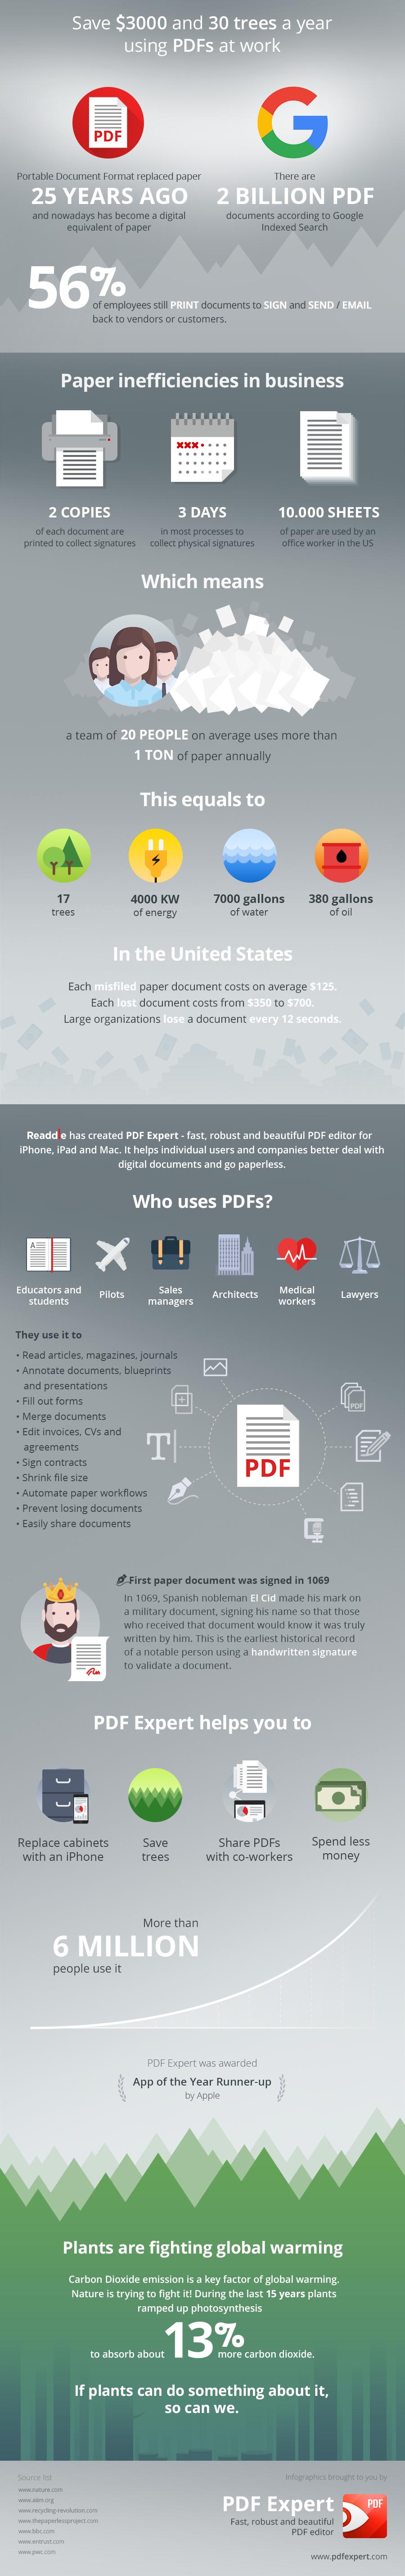 Infographic: Save $3,000 and 30 Trees a Year by Using PDF Documents in Place of Paper at Work